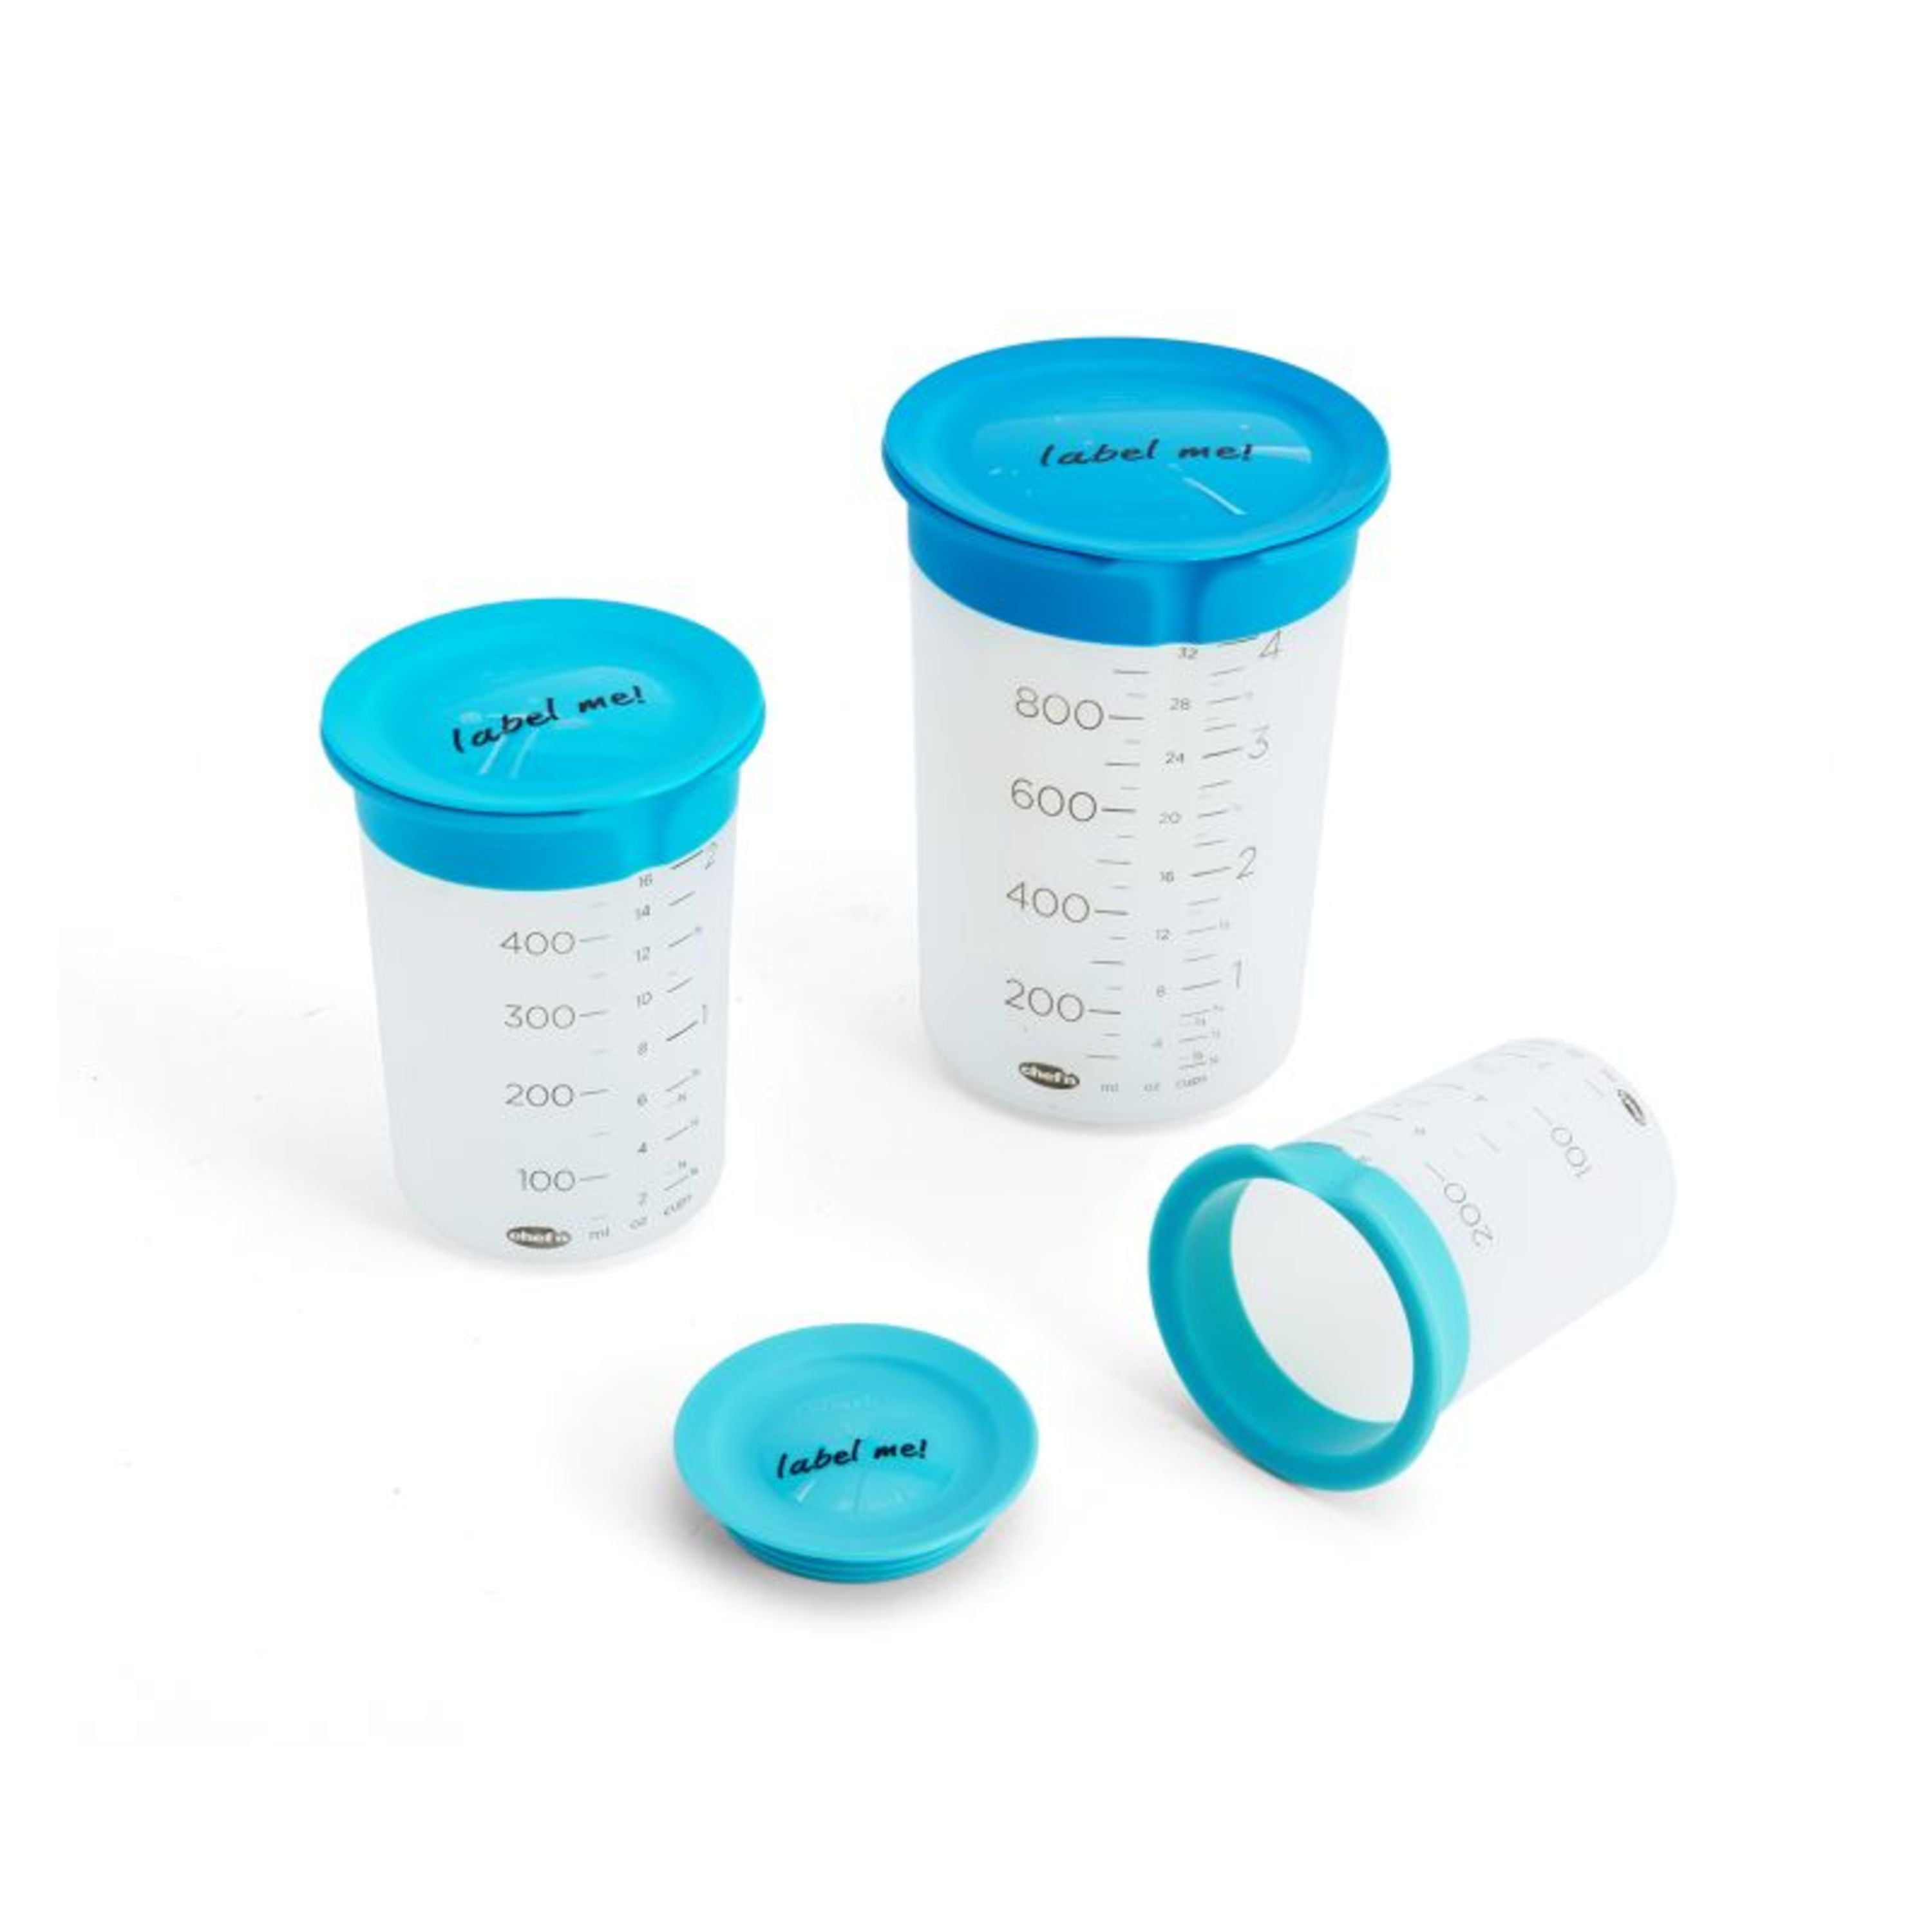 SleekStor Pinch + Pour Collapsible Measuring Cups – Chef'n